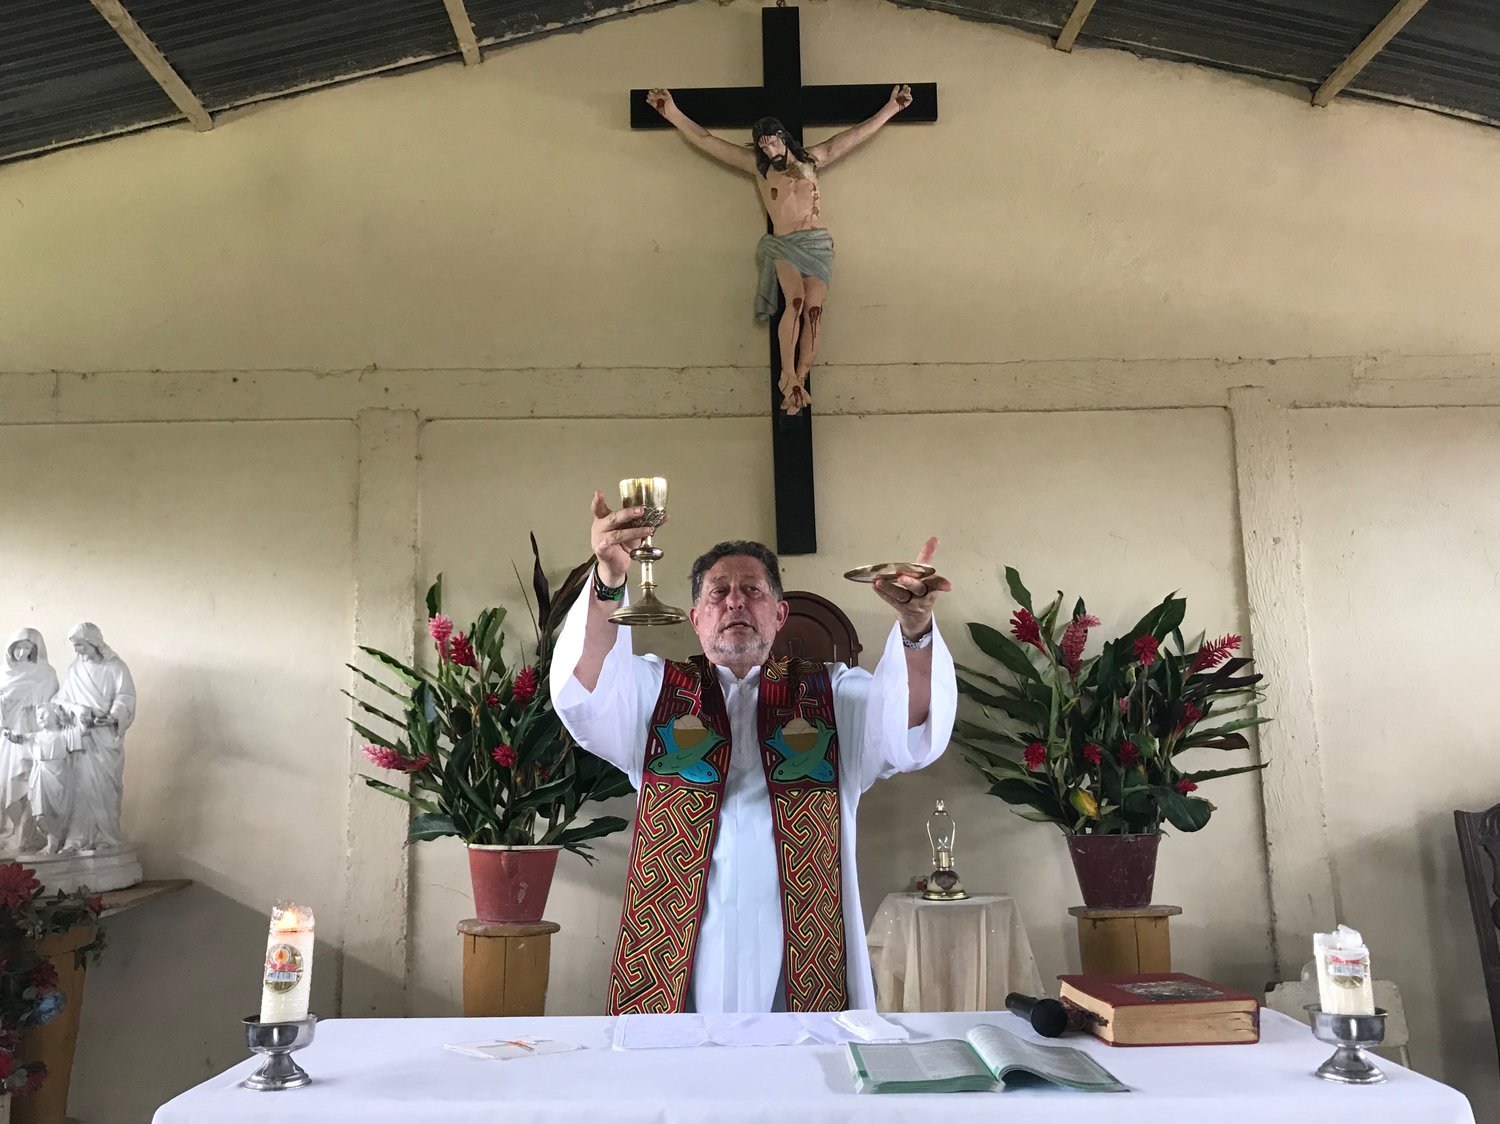 Jesuit Father Alfredo Ferro celebrates Mass July 14, 2019, in the indigenous community of Nazaret, Colombia. In Pope Francis' postsynodal apostolic exhortation, "Querida Amazonia," released Feb. 12, 2020, the pontiff acknowledged the serious shortage of priests in remote areas of the Amazon, but he insisted not all avenues have been exhausted to address the issue.